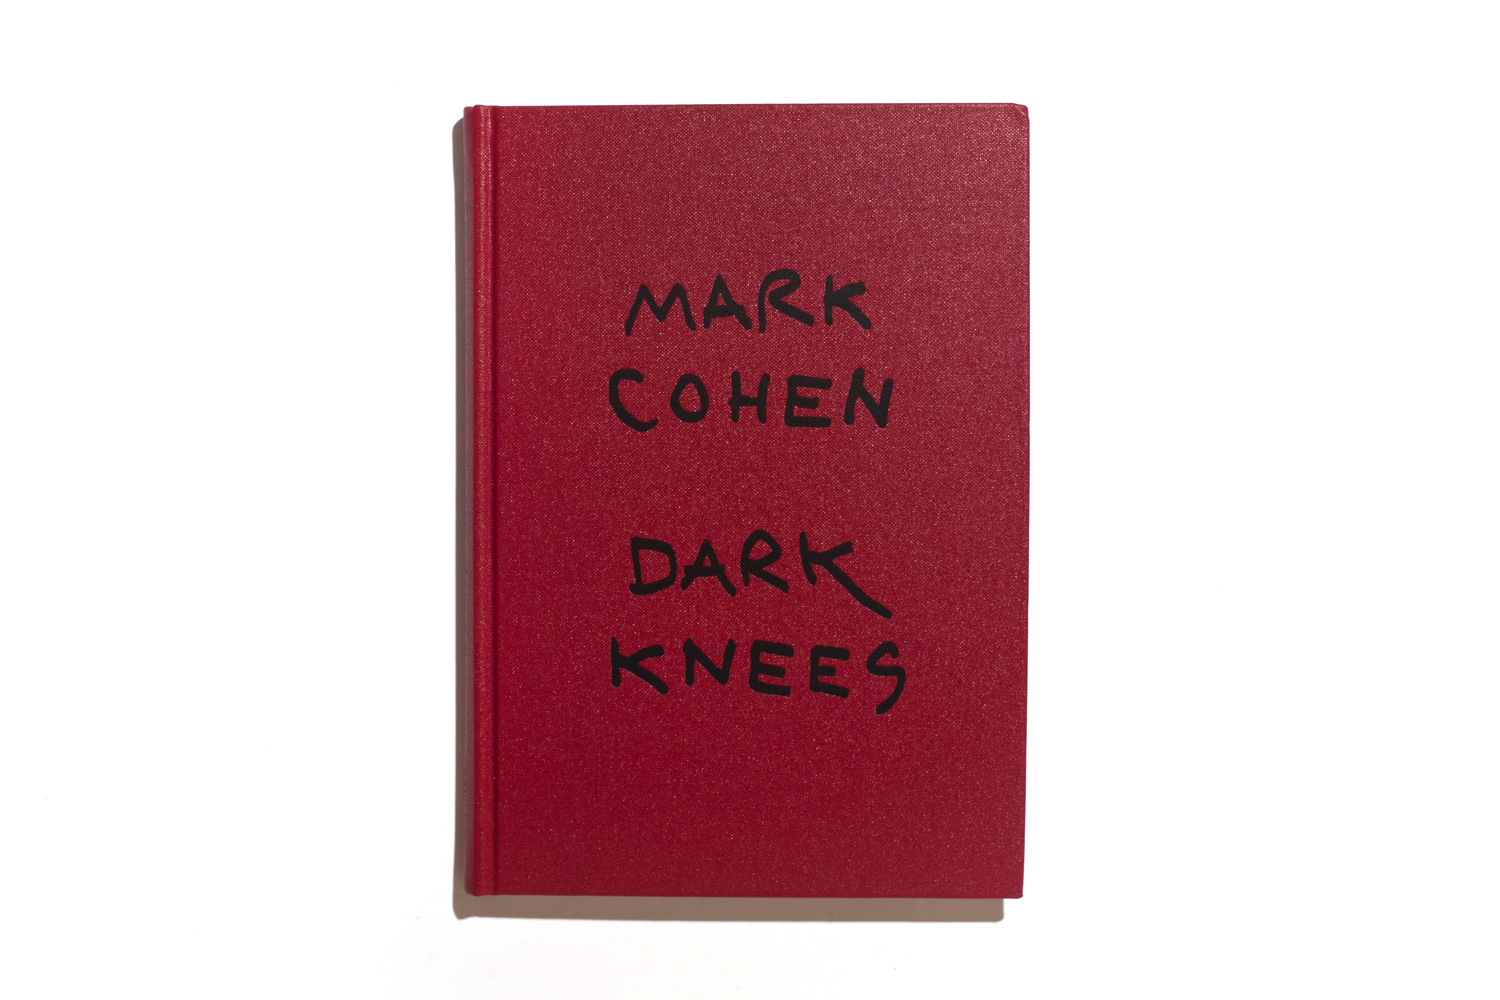 Dark Knees by Mark Cohen, published by Le Bal/EXB (Paris), selected by Chris Boot, executive director, Aperture Foundation.